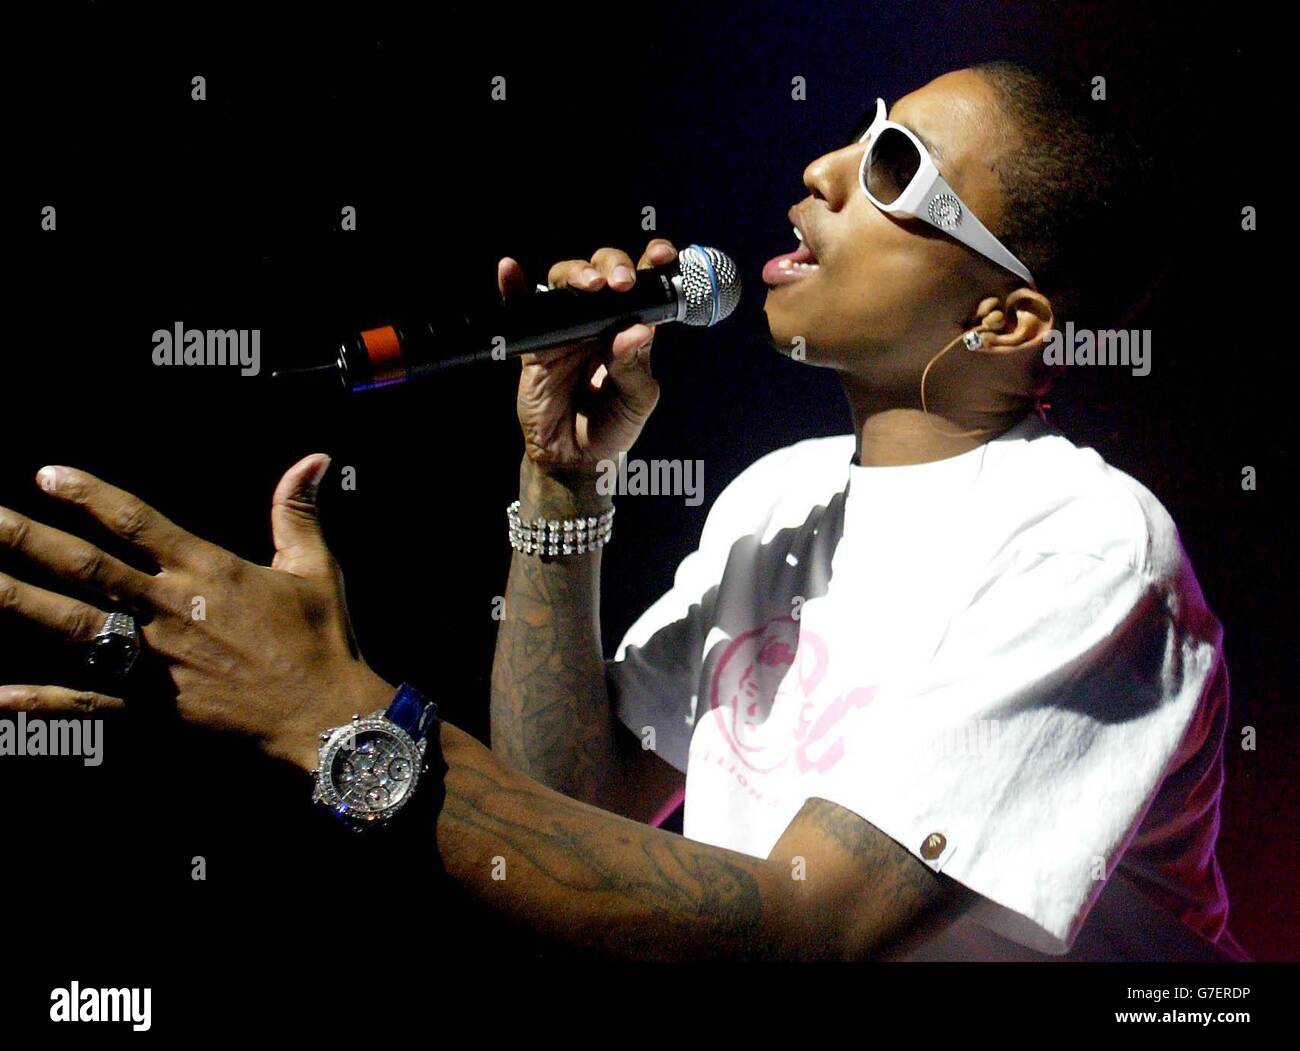 N.E.R.D. at the Carling Apollo in Manchester. N.E.R.D. lead singer Pharrell Williams during his band's concert at the Carling Apollo in Mancheste. Stock Photo